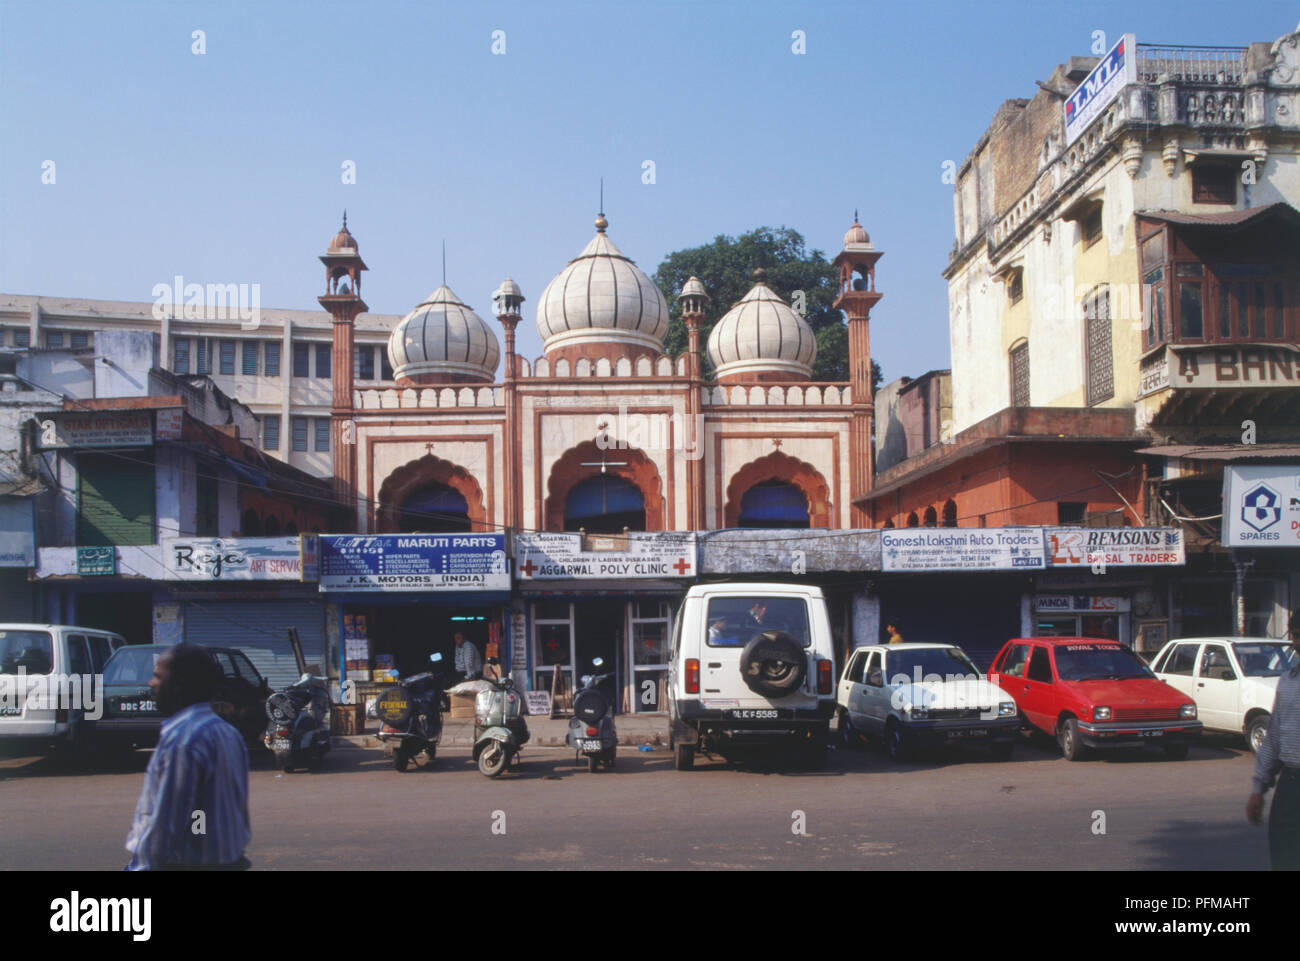 India, Delhi, Fakr-ul-Masjid, red sandstone mosque, white domes and minarets with black stripes, rising above rows of shops and offices along busy street, cars and motorbikes parked in front. Stock Photo